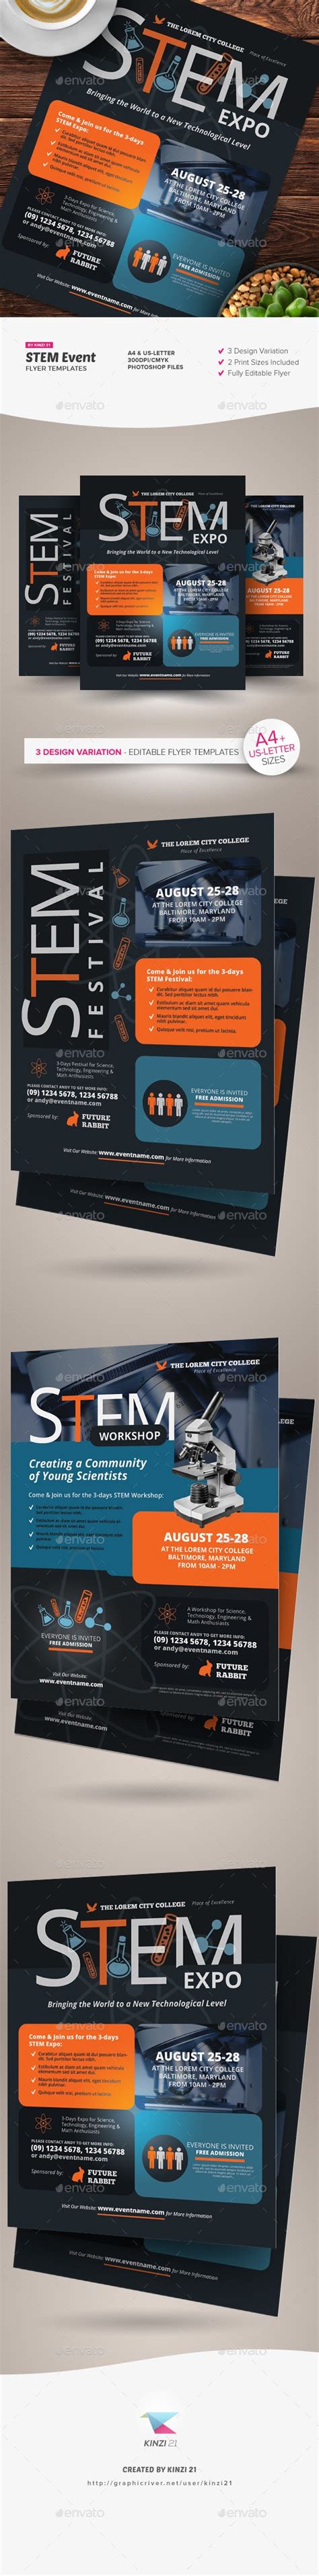 Stem Event Flyer Templates By Kinzi21 Graphicriver